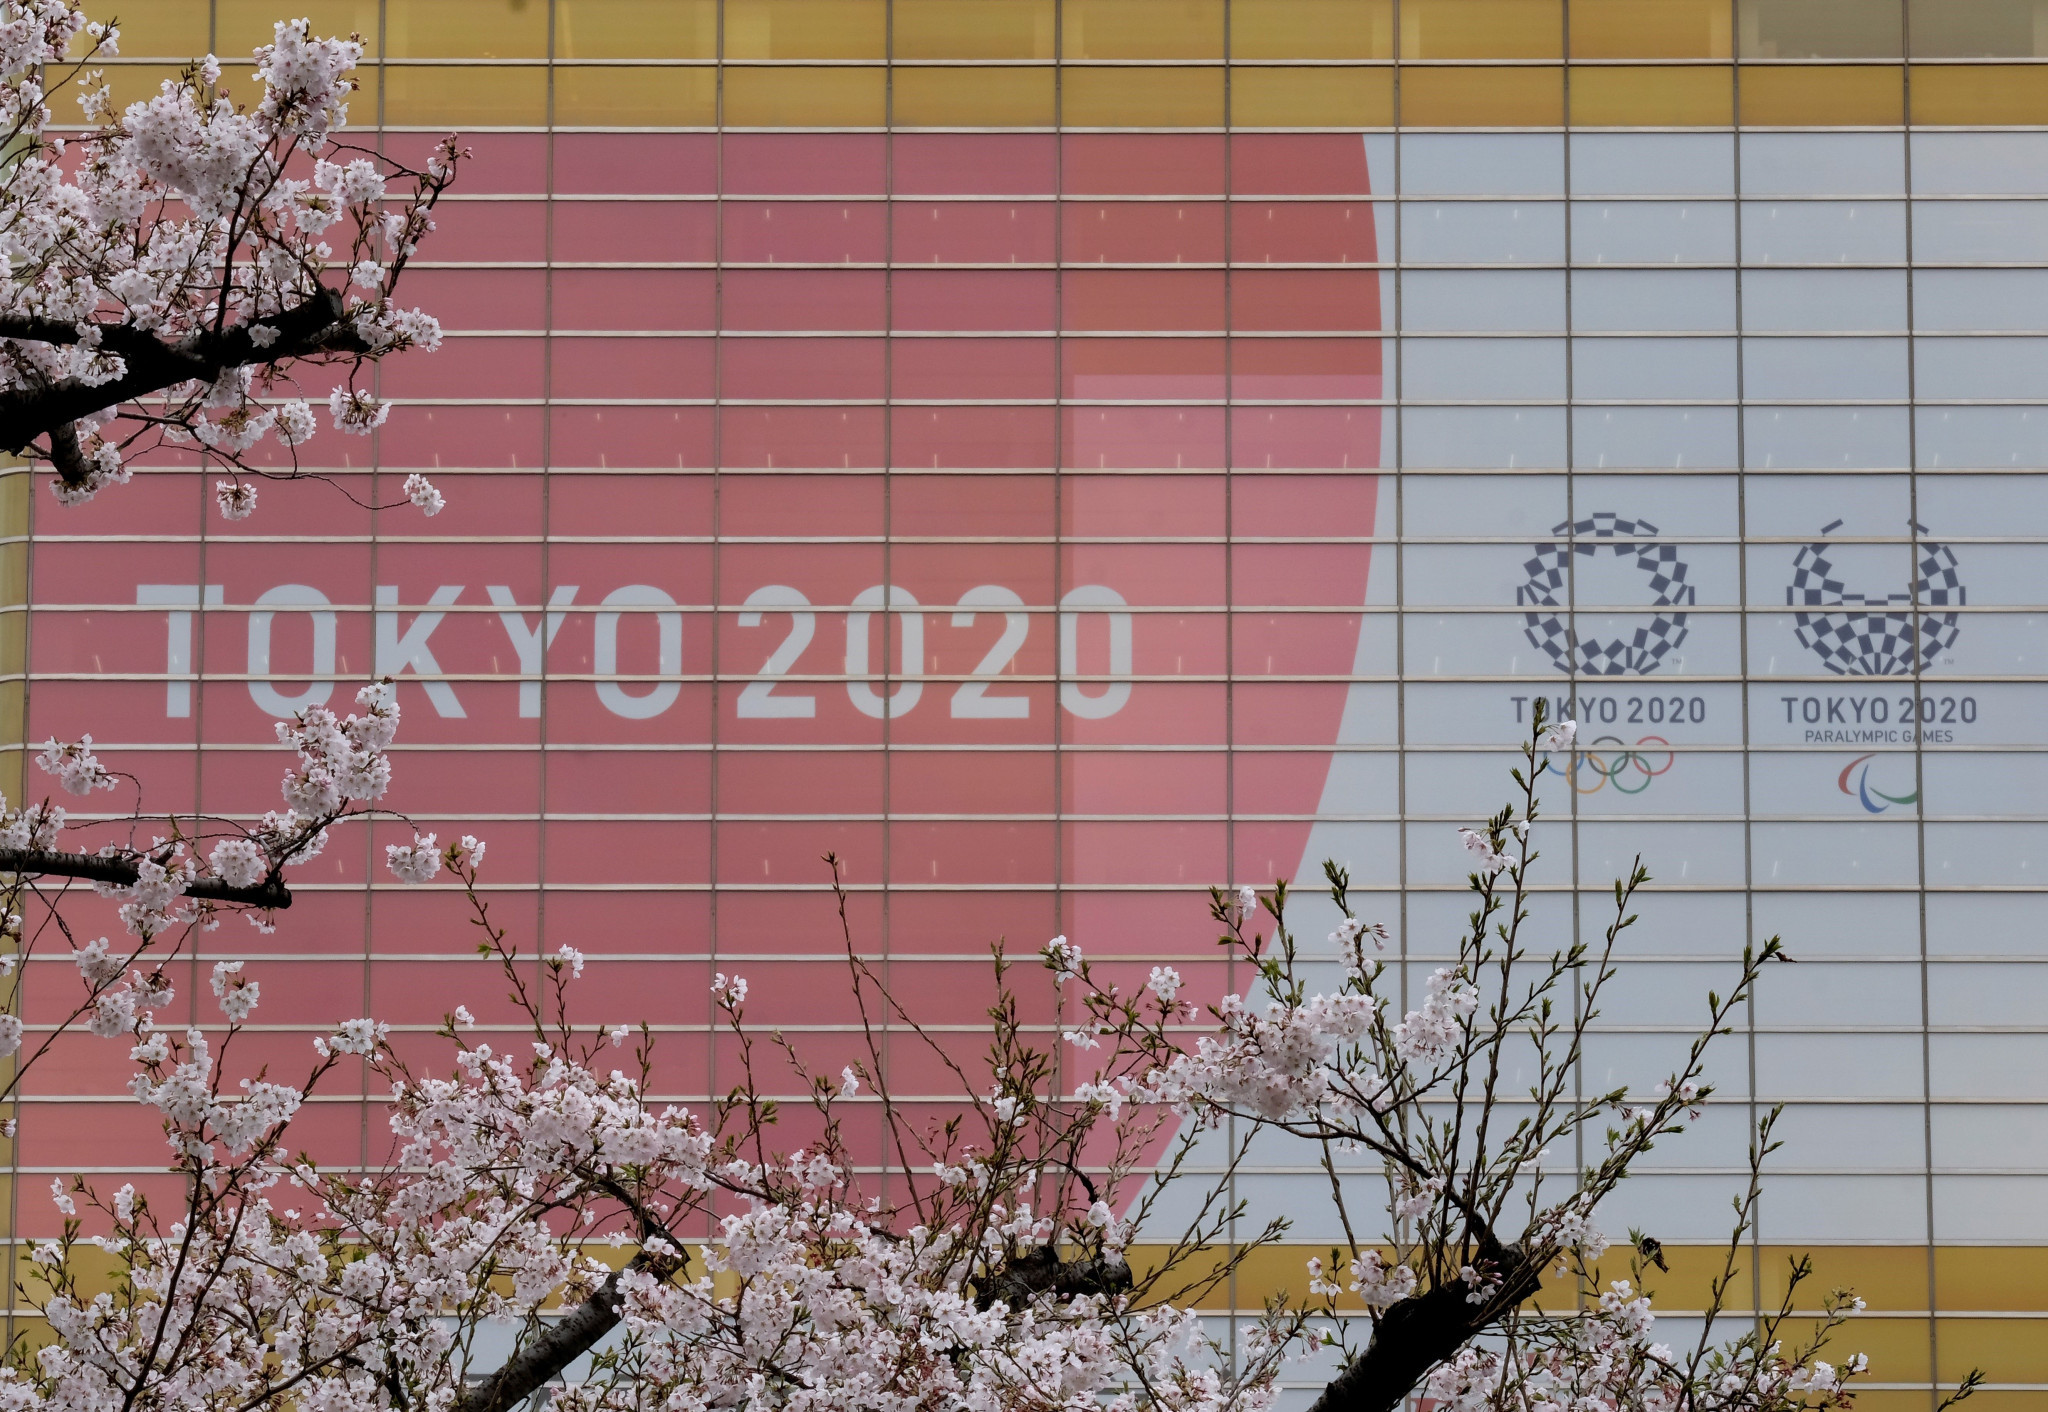 Dates for the rescheduled Tokyo 2020 Paralympic Games were confirmed last month ©Getty Images